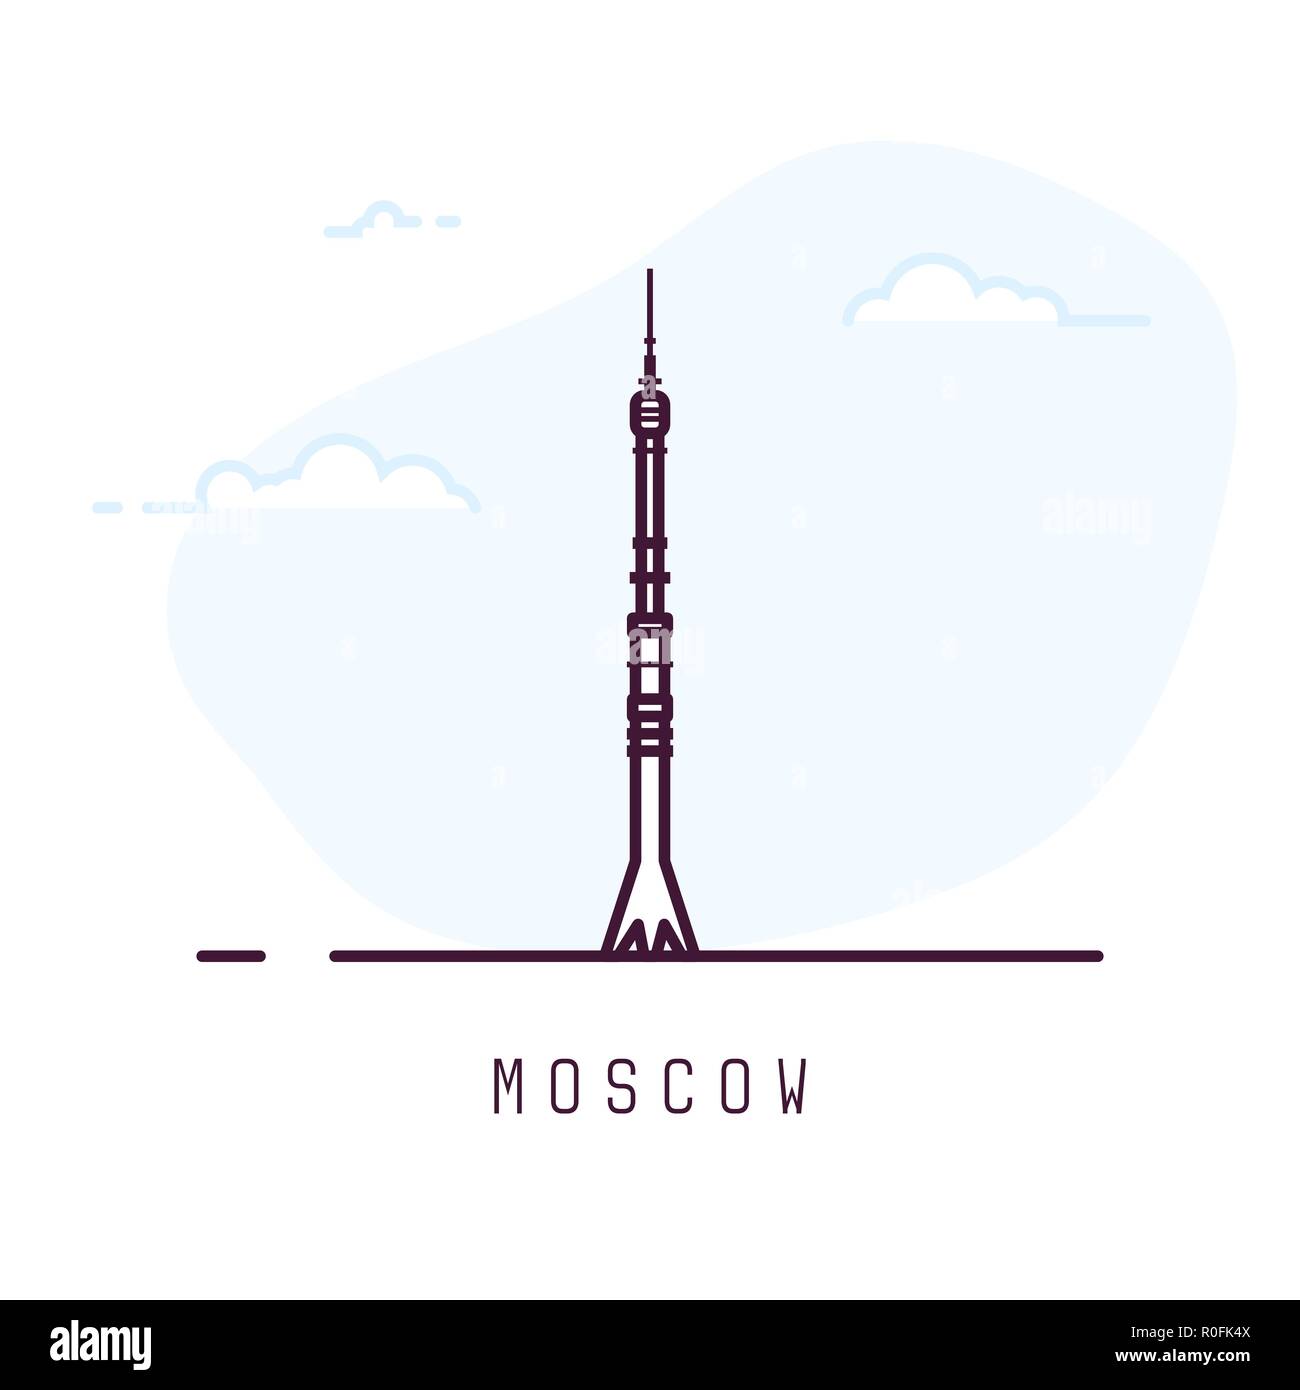 Moscow Ostankino tower Stock Vector